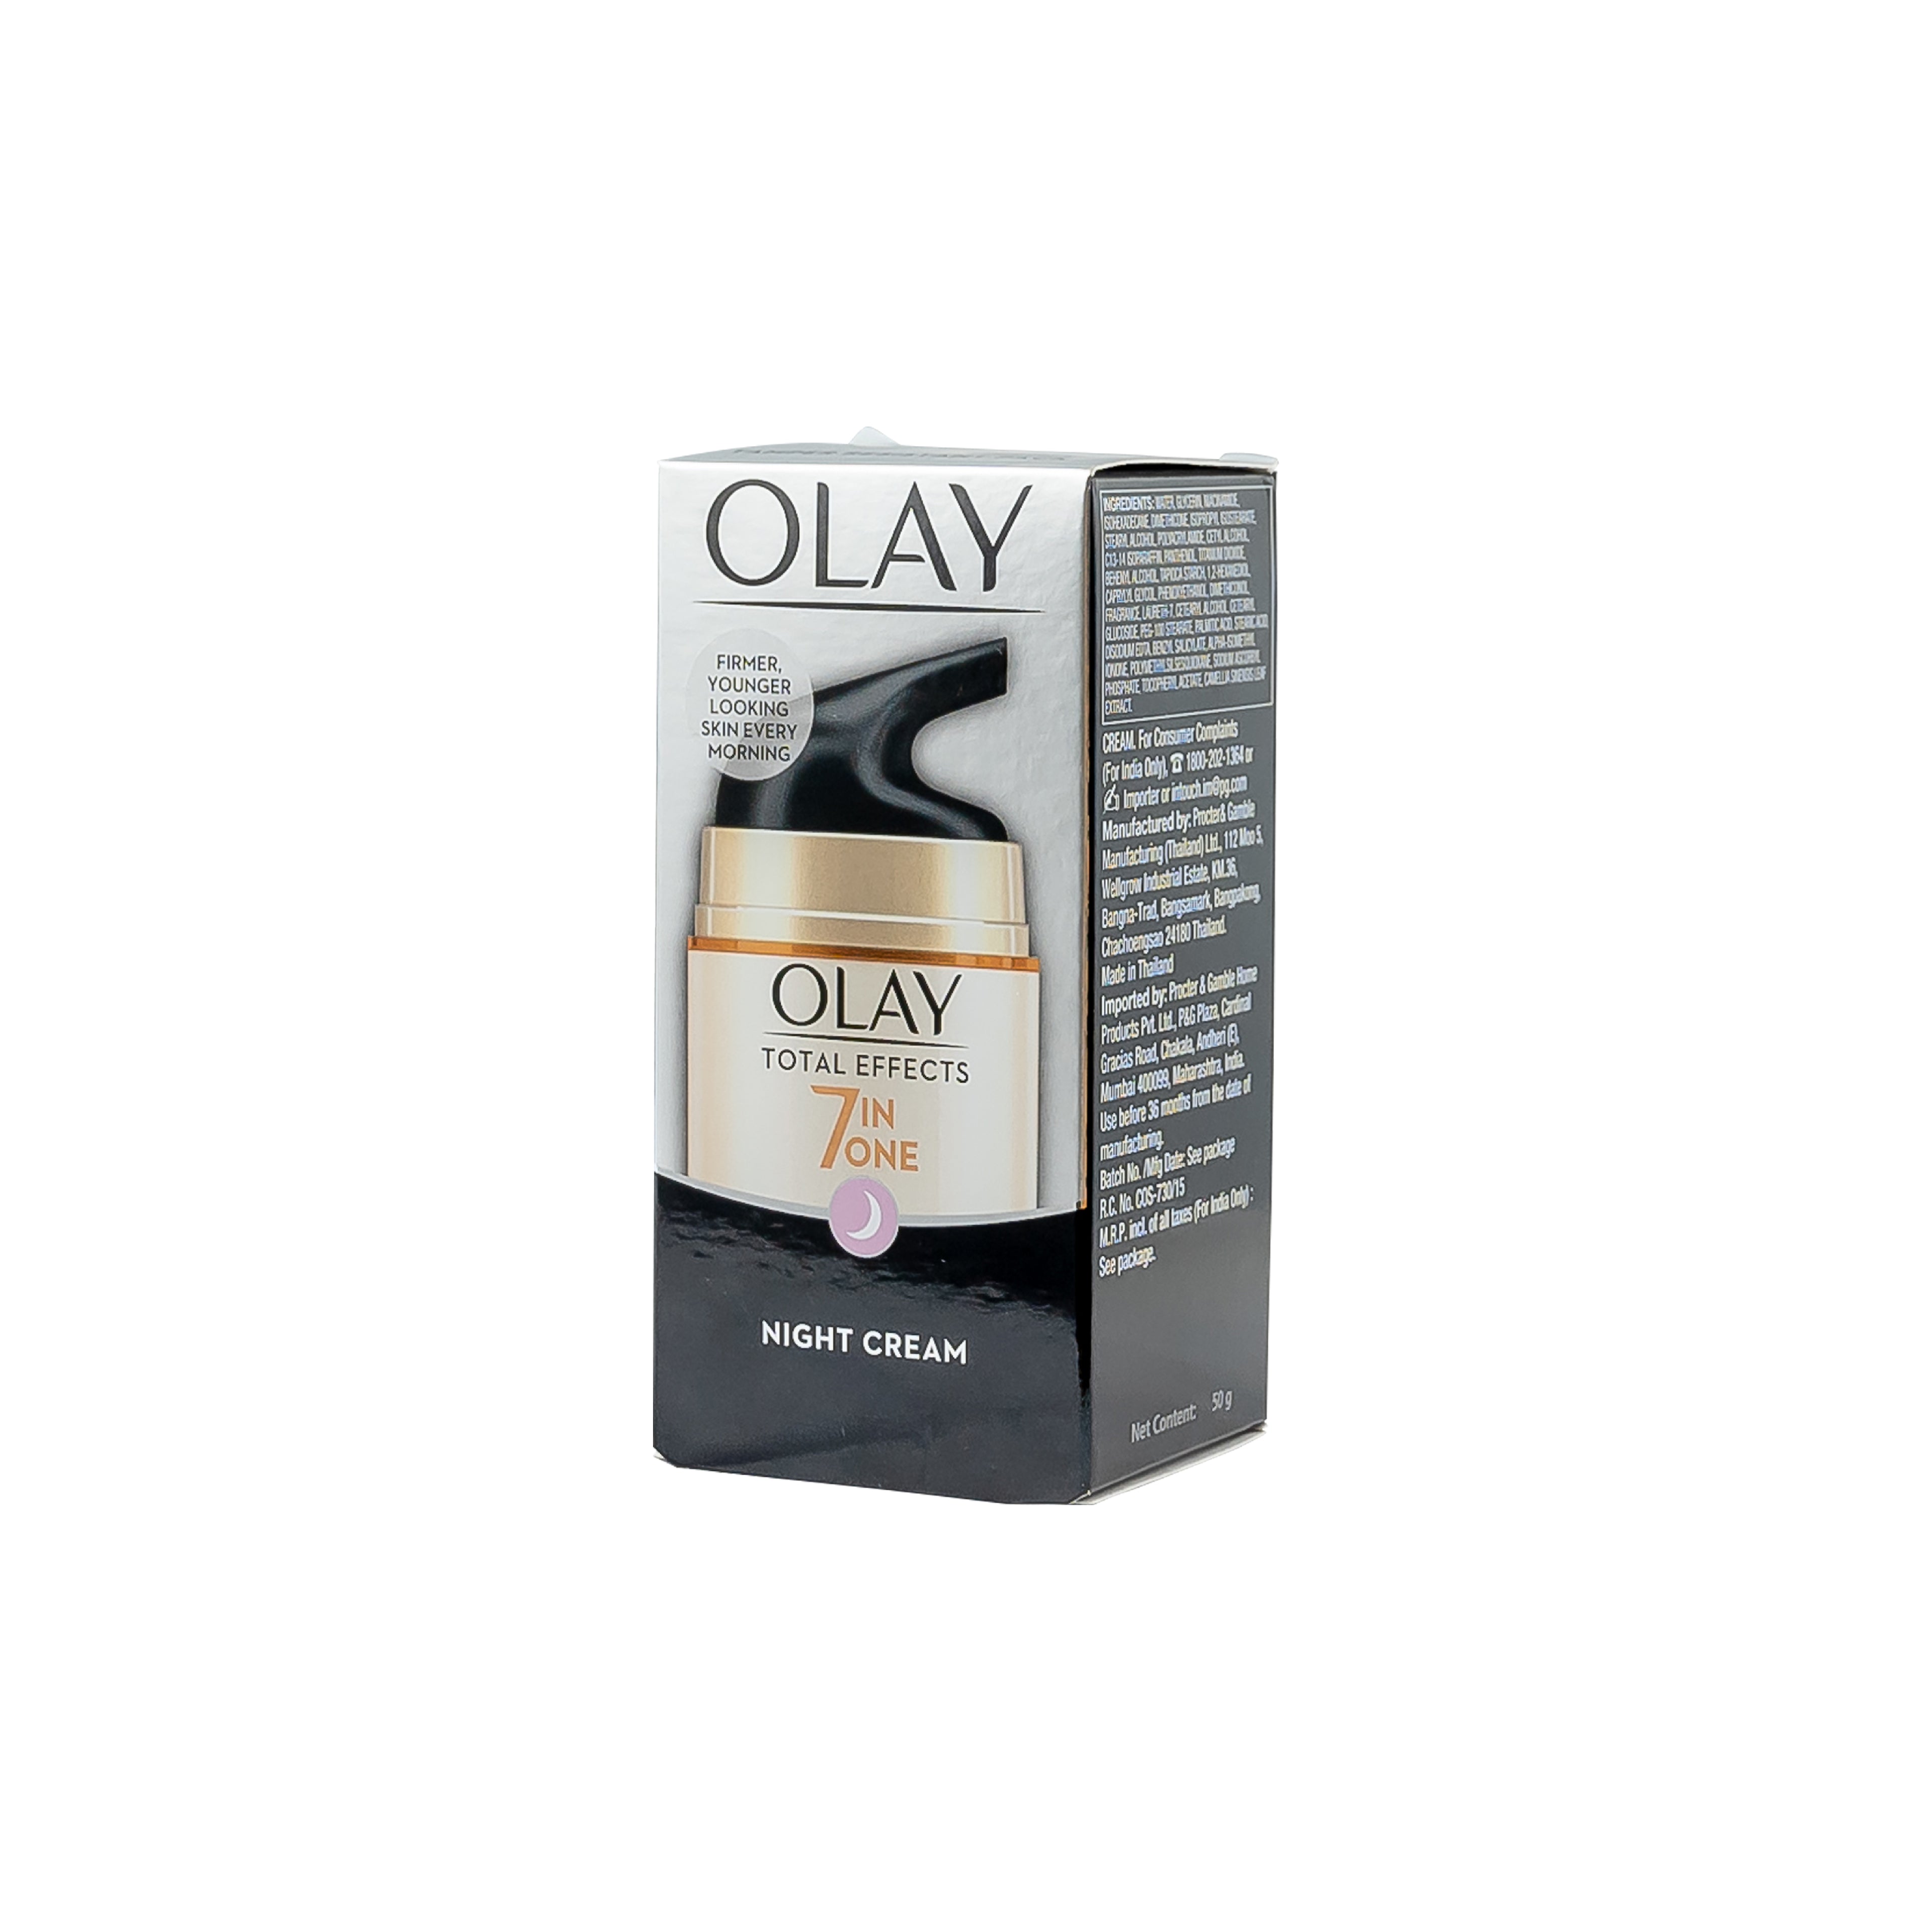 Olay Total Effects 7 in 1 Night Cream (50gm)